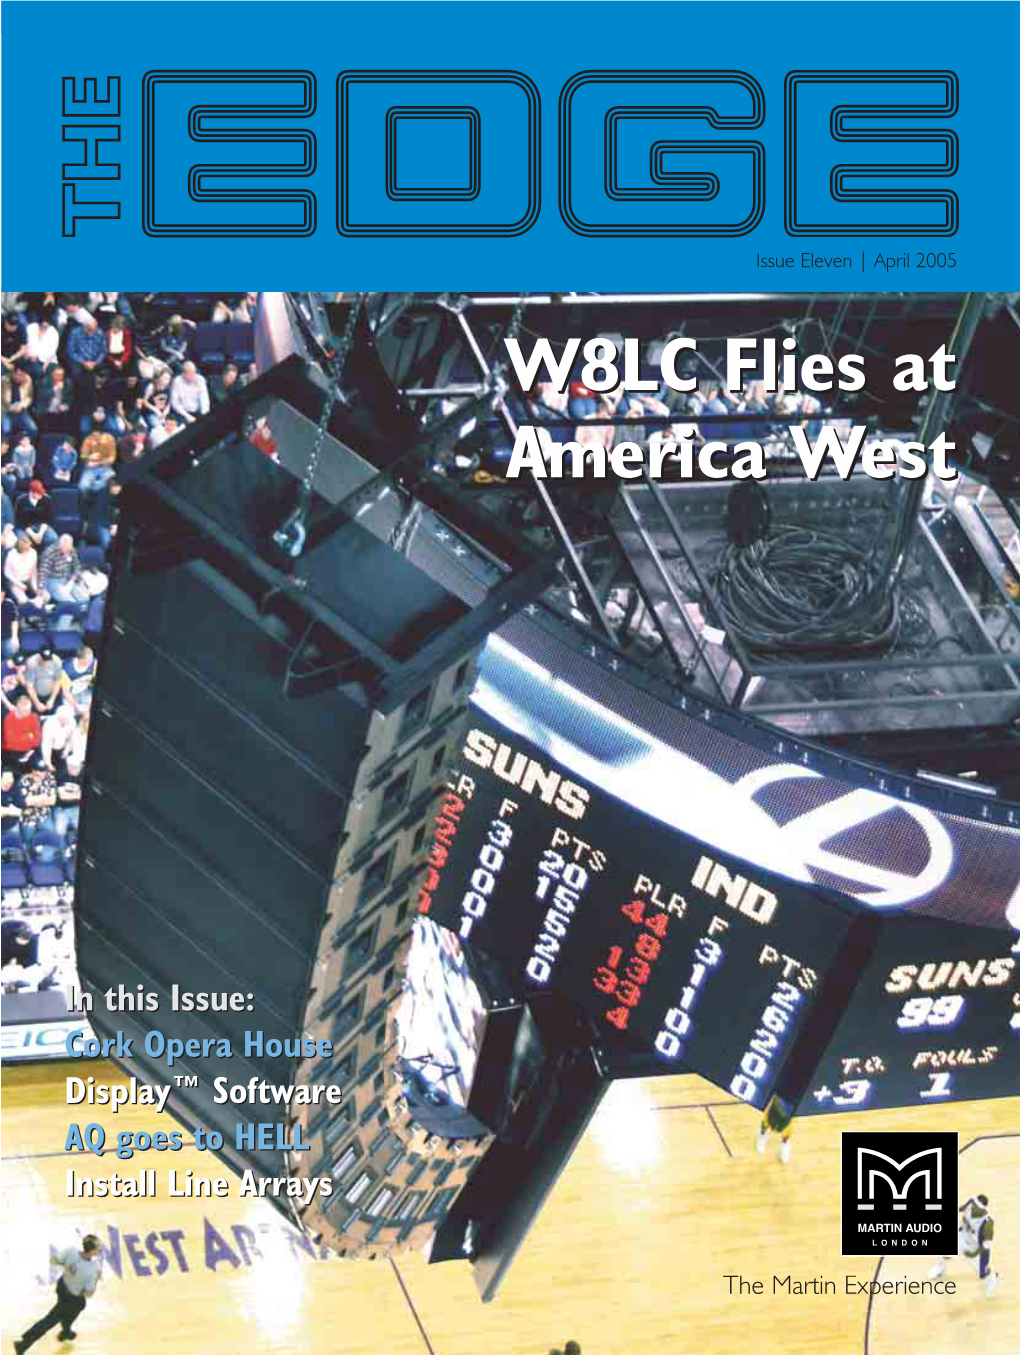 W8LC Flies at America West